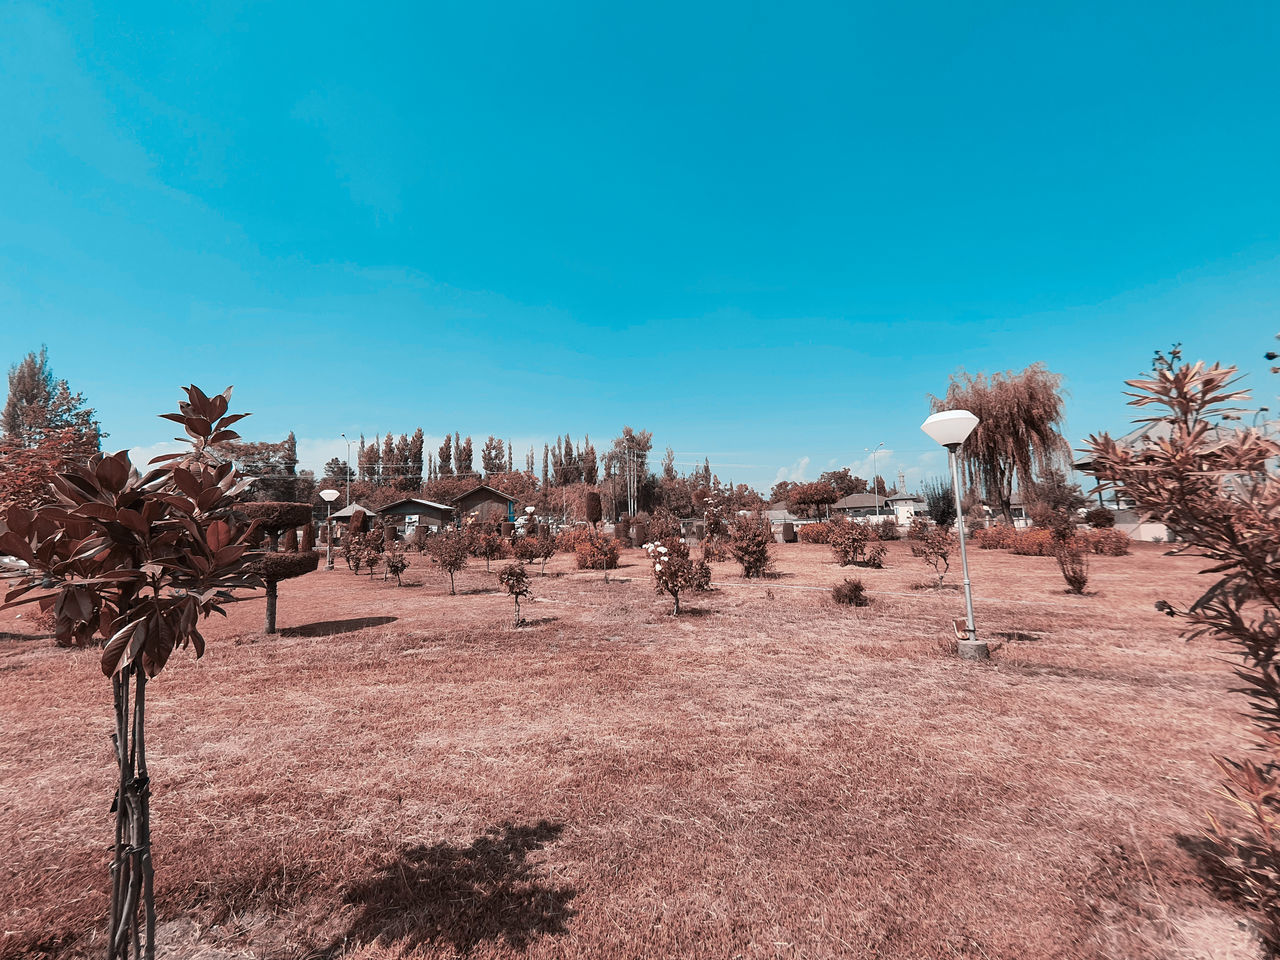 PANORAMIC VIEW OF TREES ON FIELD AGAINST BLUE SKY